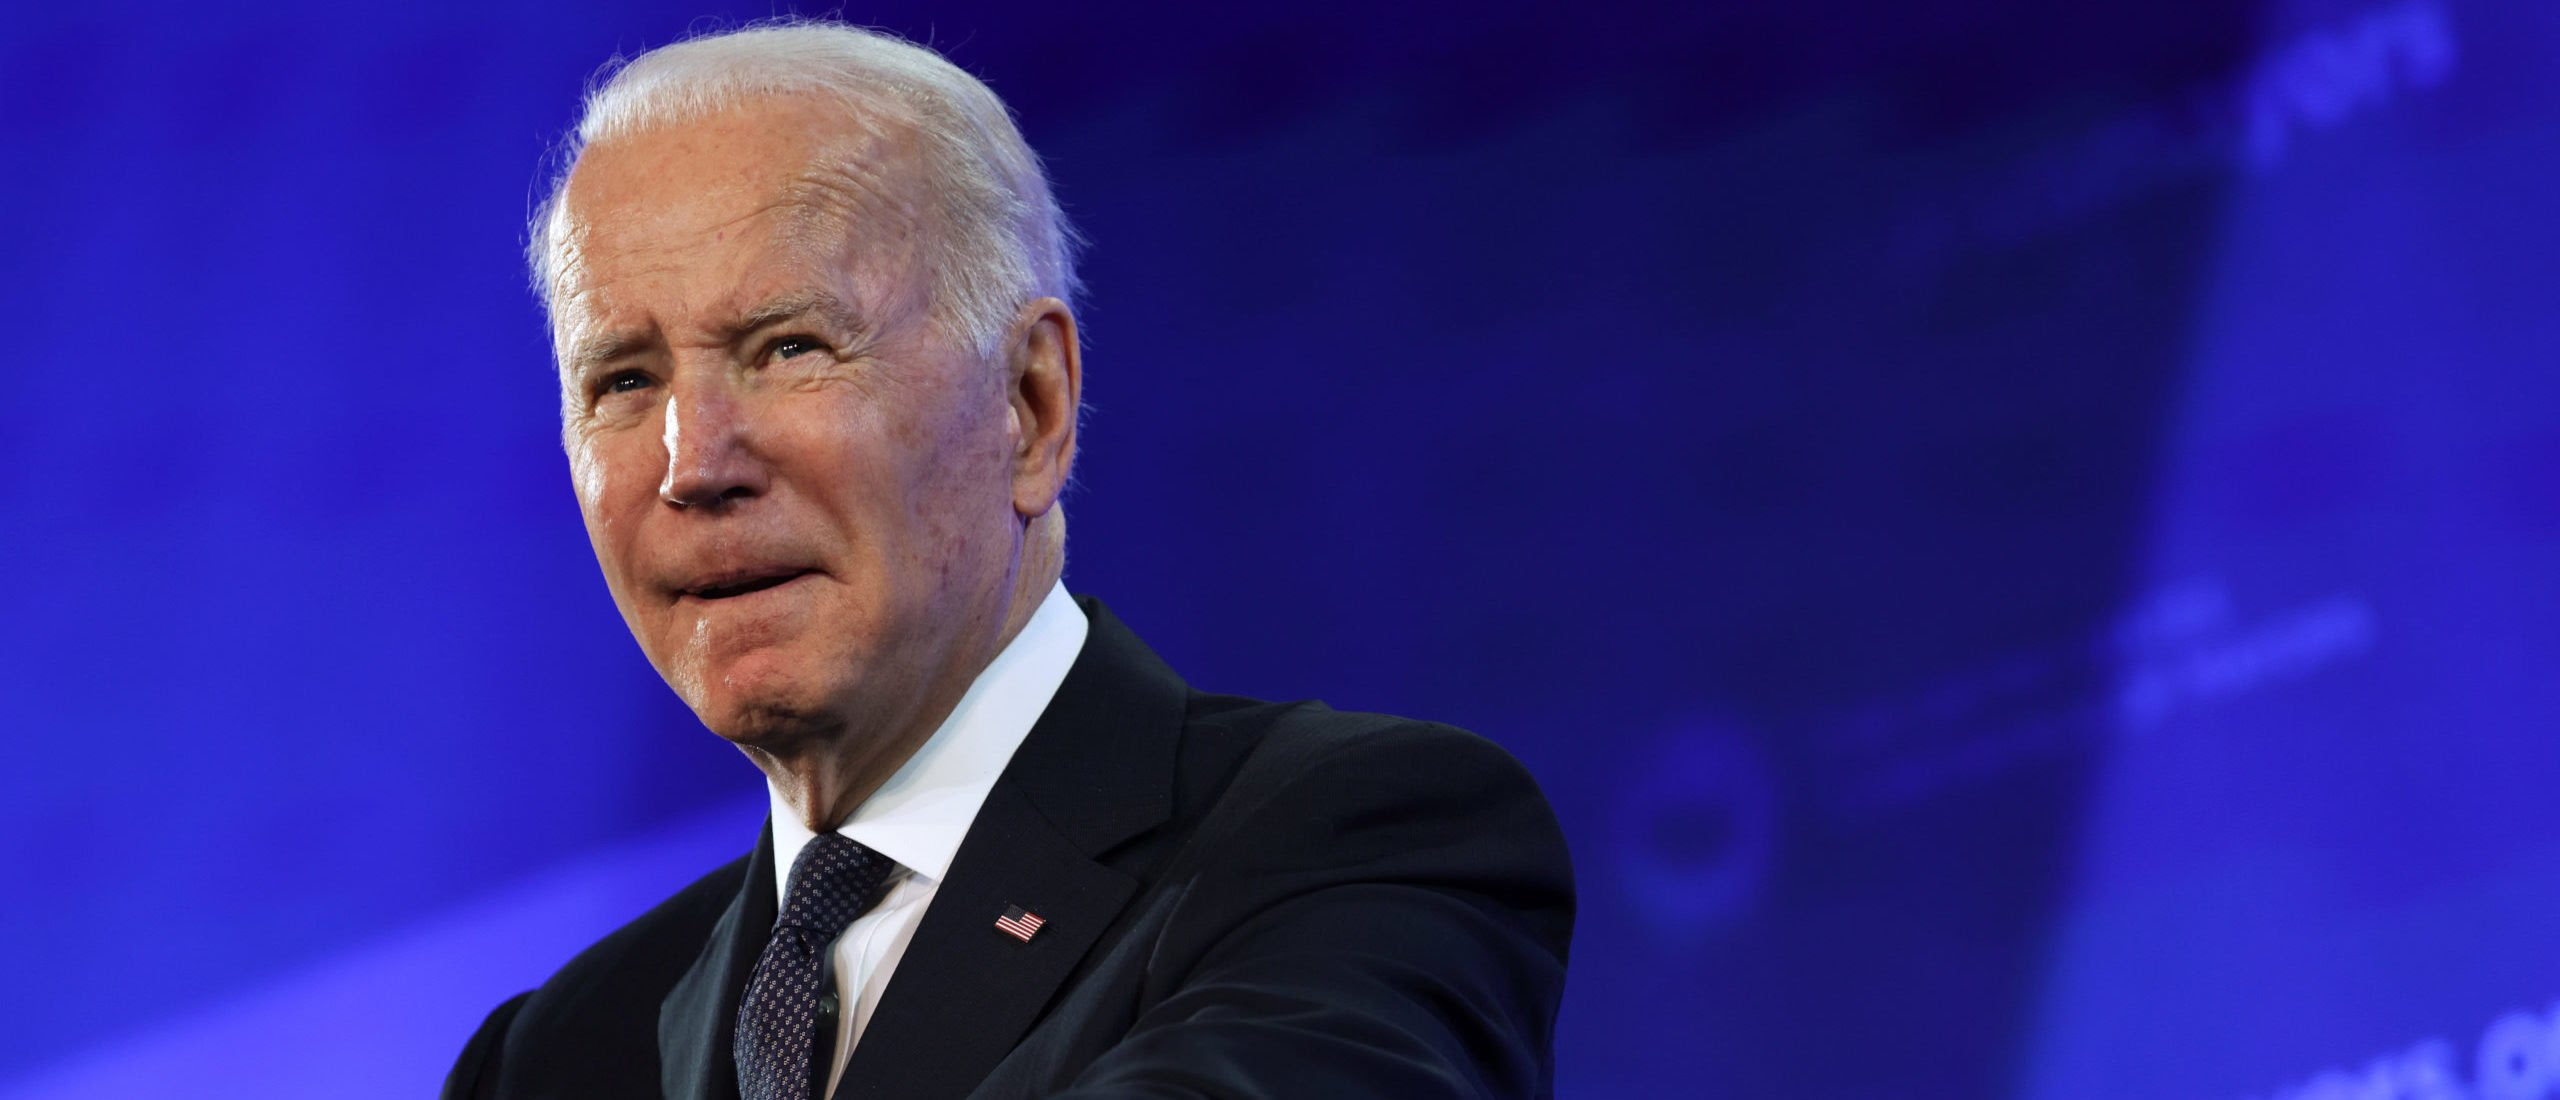 Biden Reportedly Plans To Regulate Crypto Over National Security Concerns